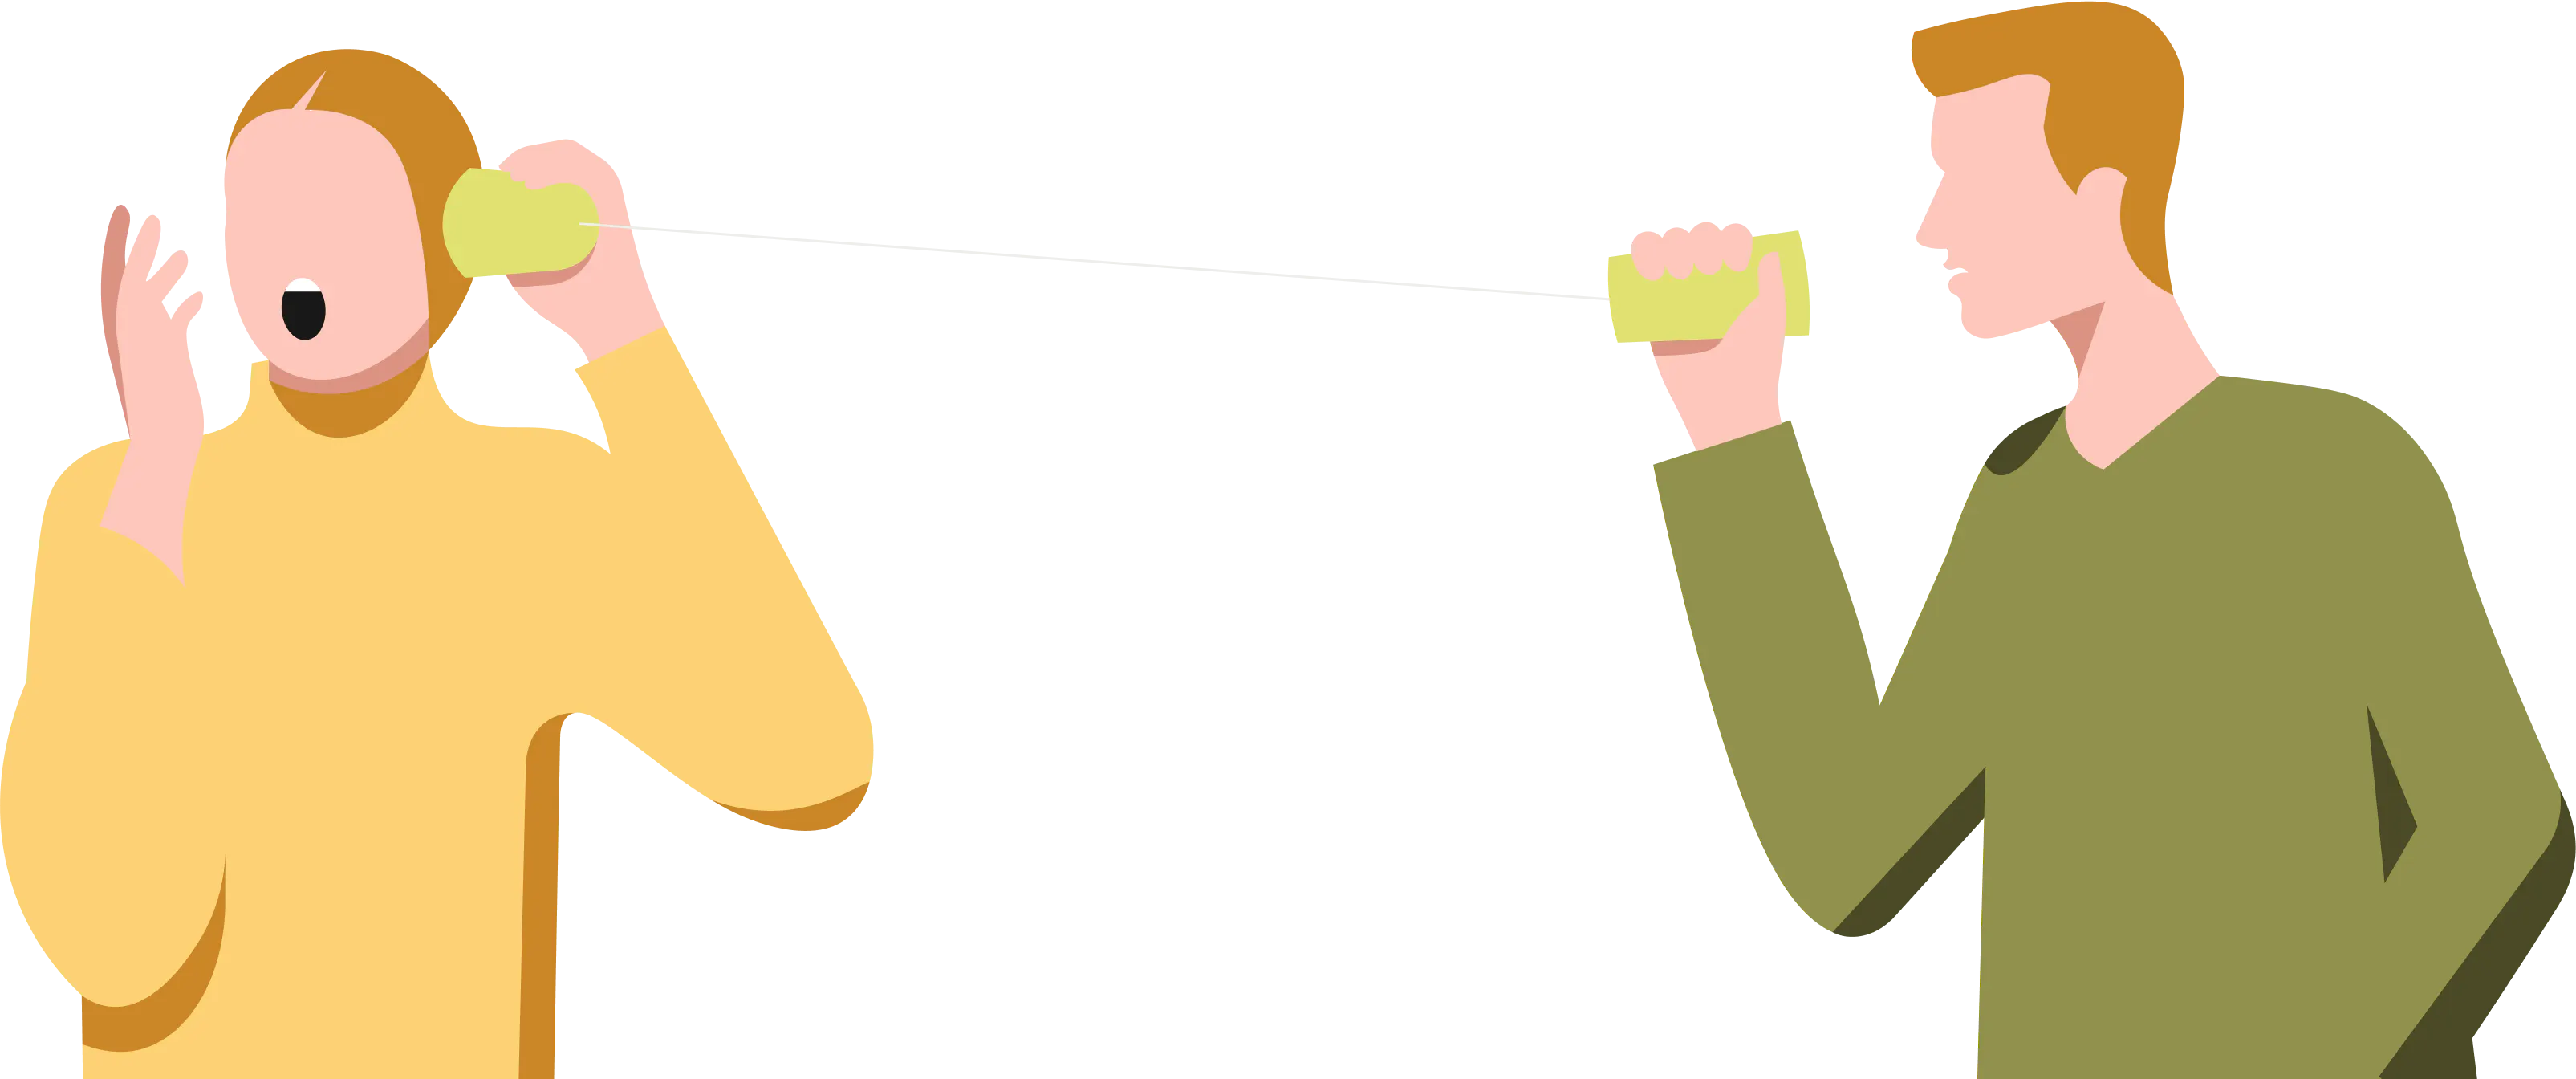 An illustration of two people talking to each other through cups and a string.